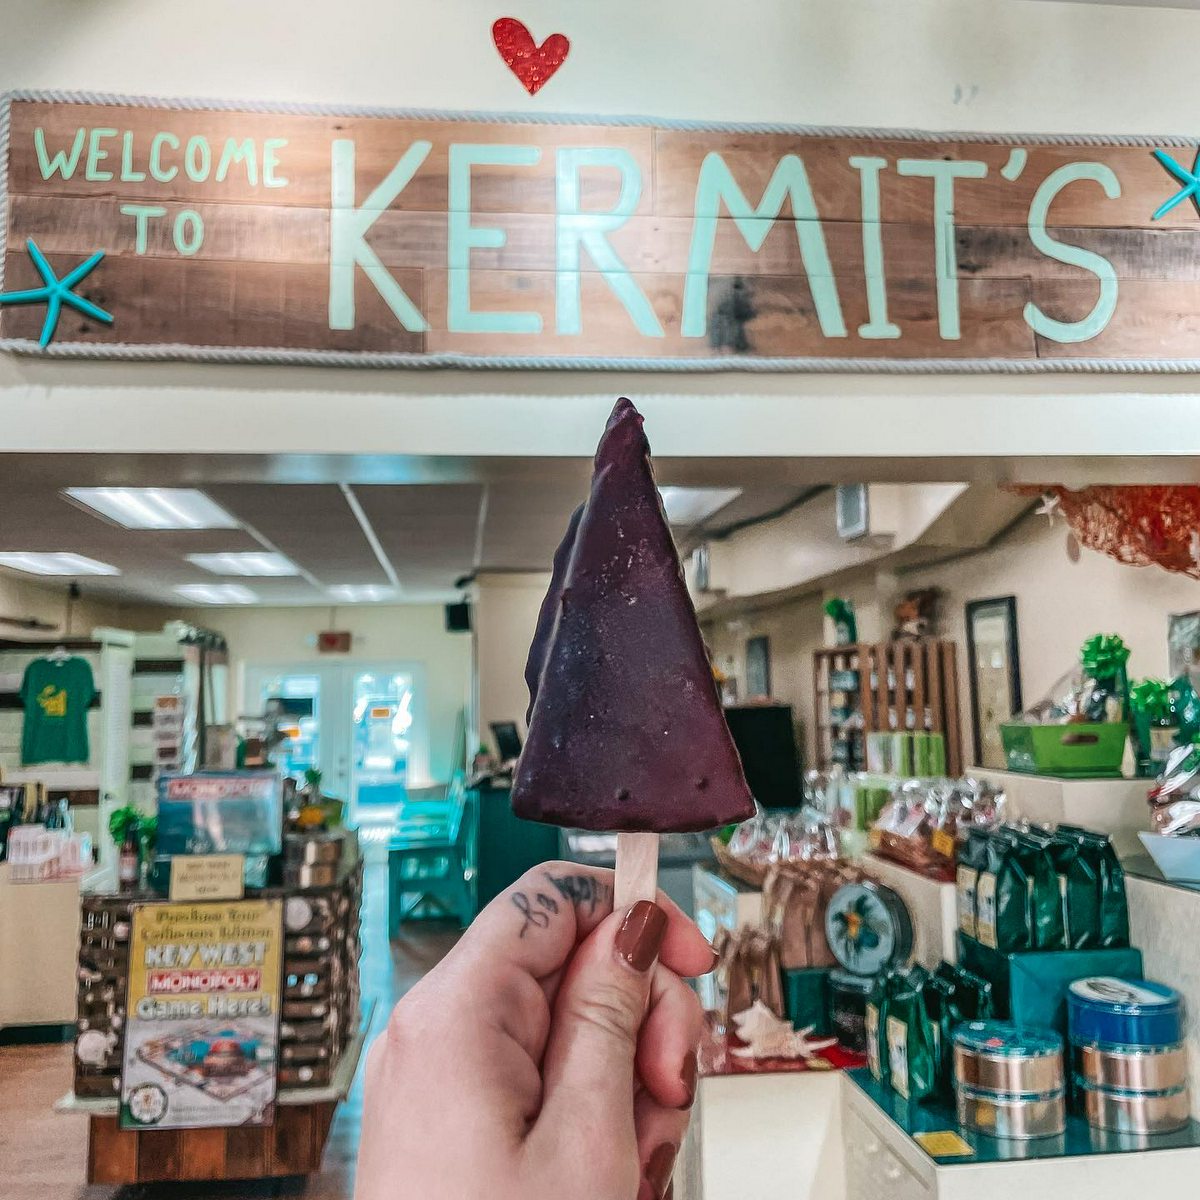 Chocolate dipped key lime pie on a stick from Kermit's in Key West